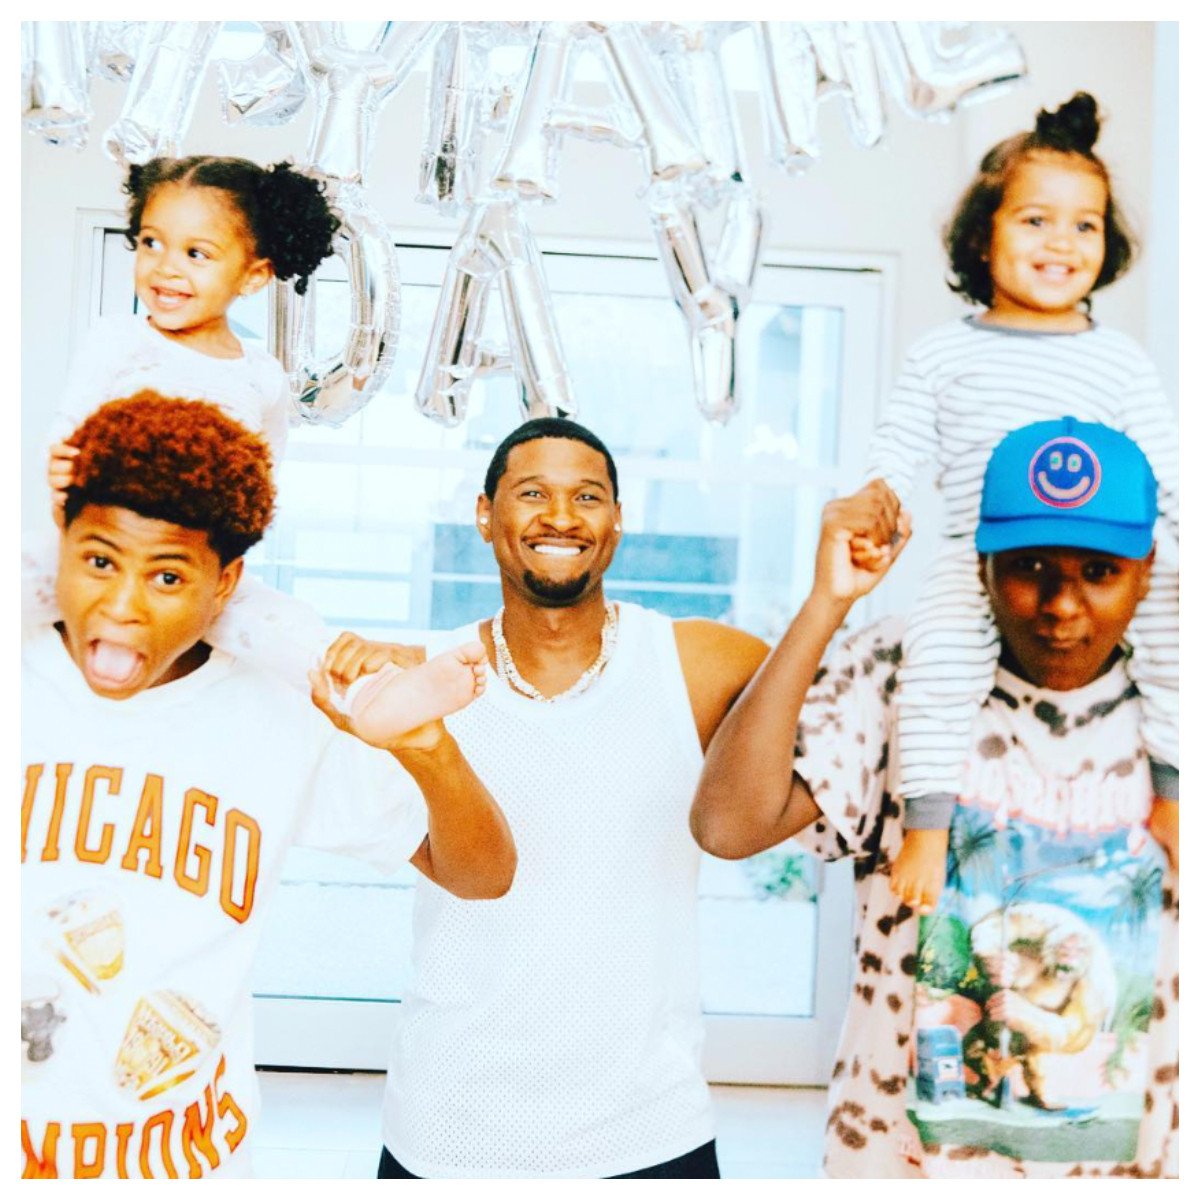 Meet Super Bowl halftime star Usher's happy blended family: the 'Yeah'  singer has 4 kids from 2 baby mamas, including current partner Jenn  Goicoechea – but which already critiques his performances?